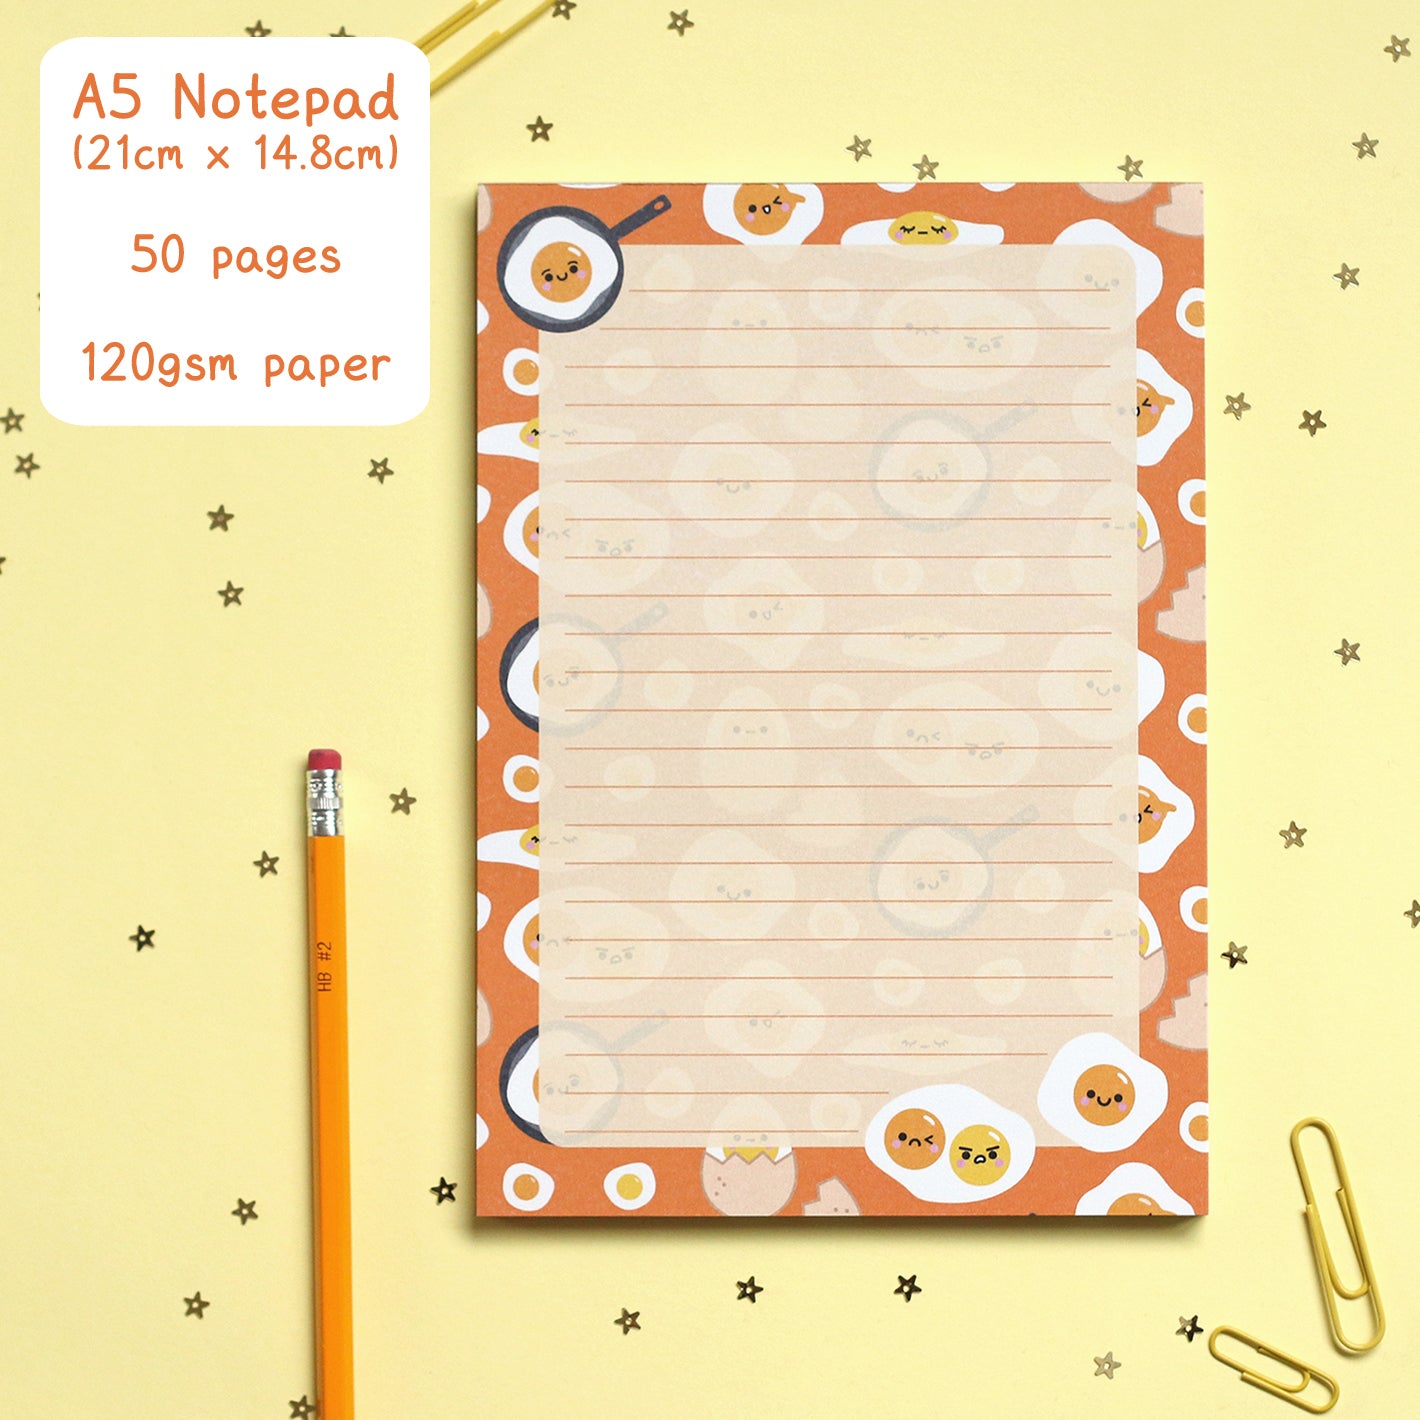 Egg Notepad by hannahdoodle